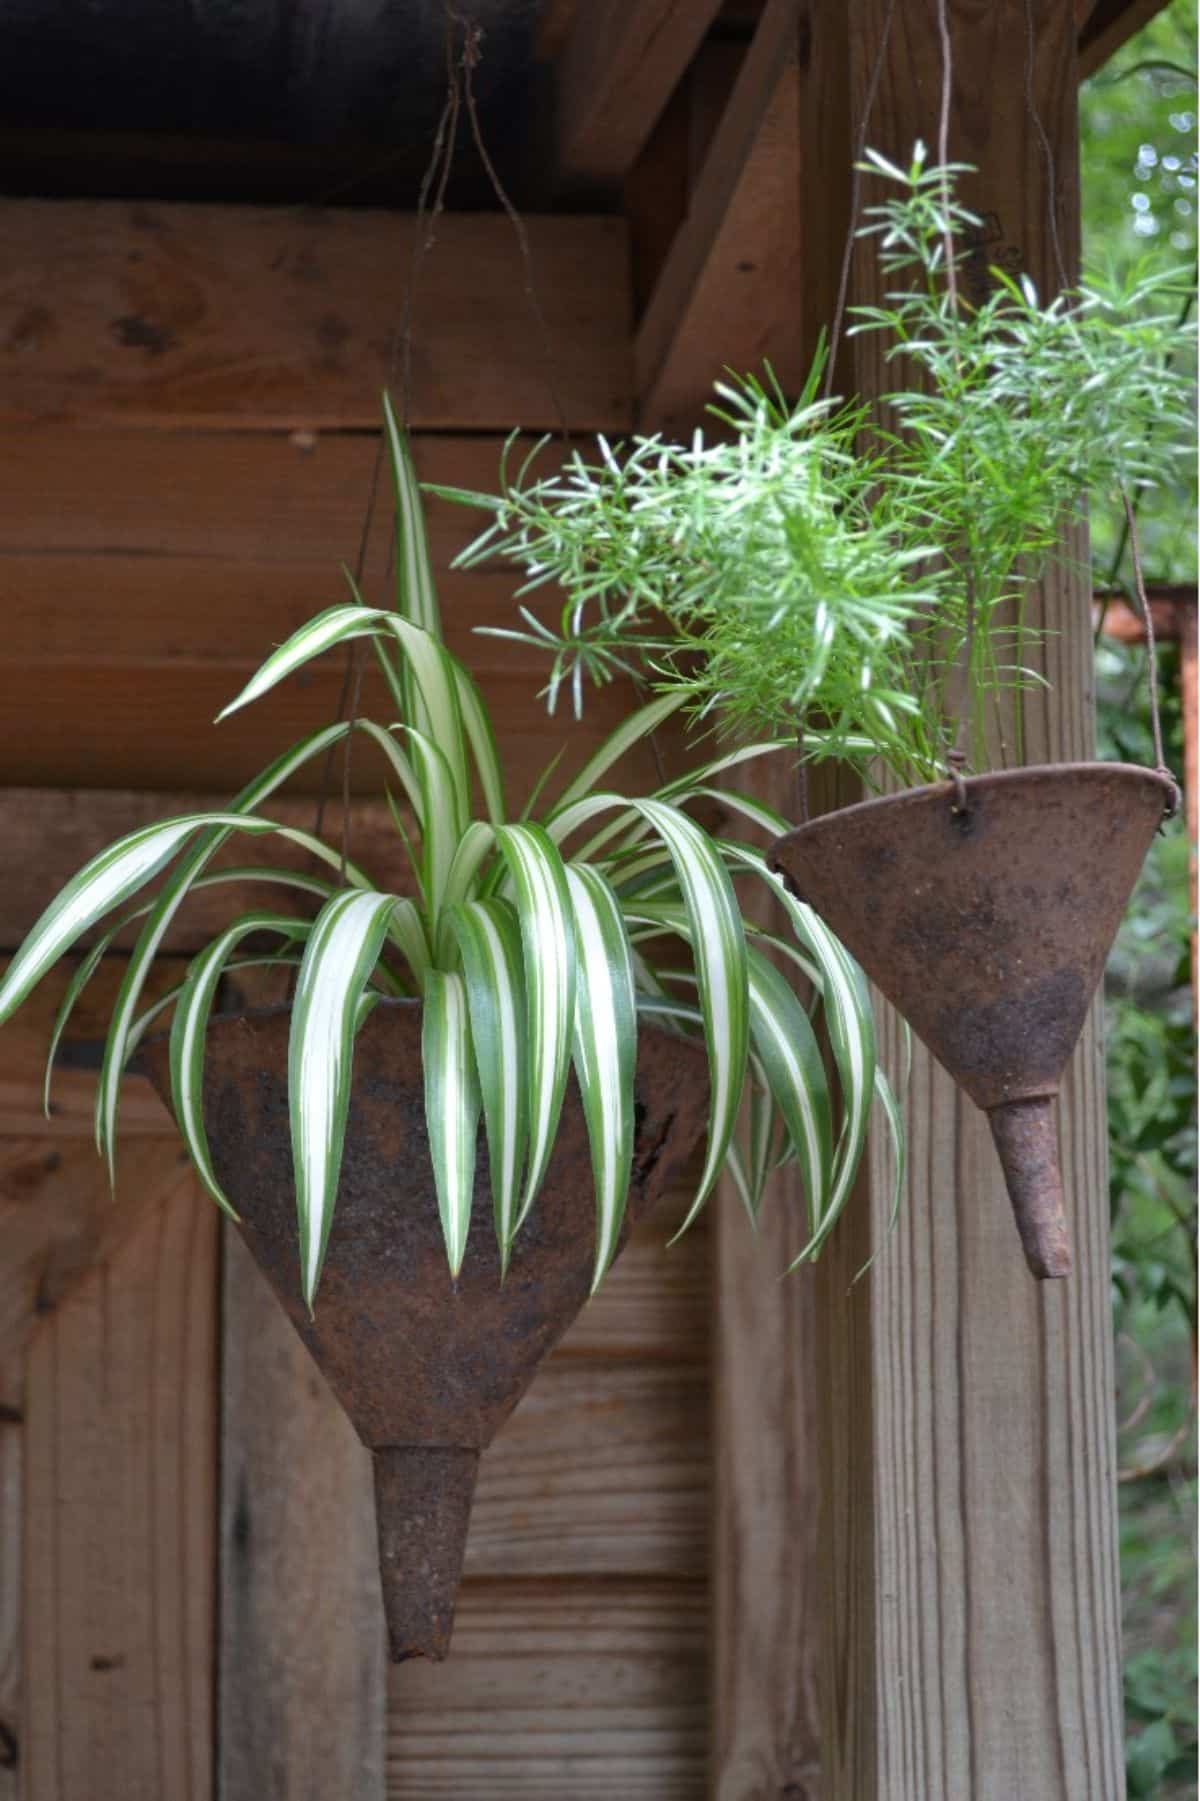 Old Funnels as Country Garden Containers